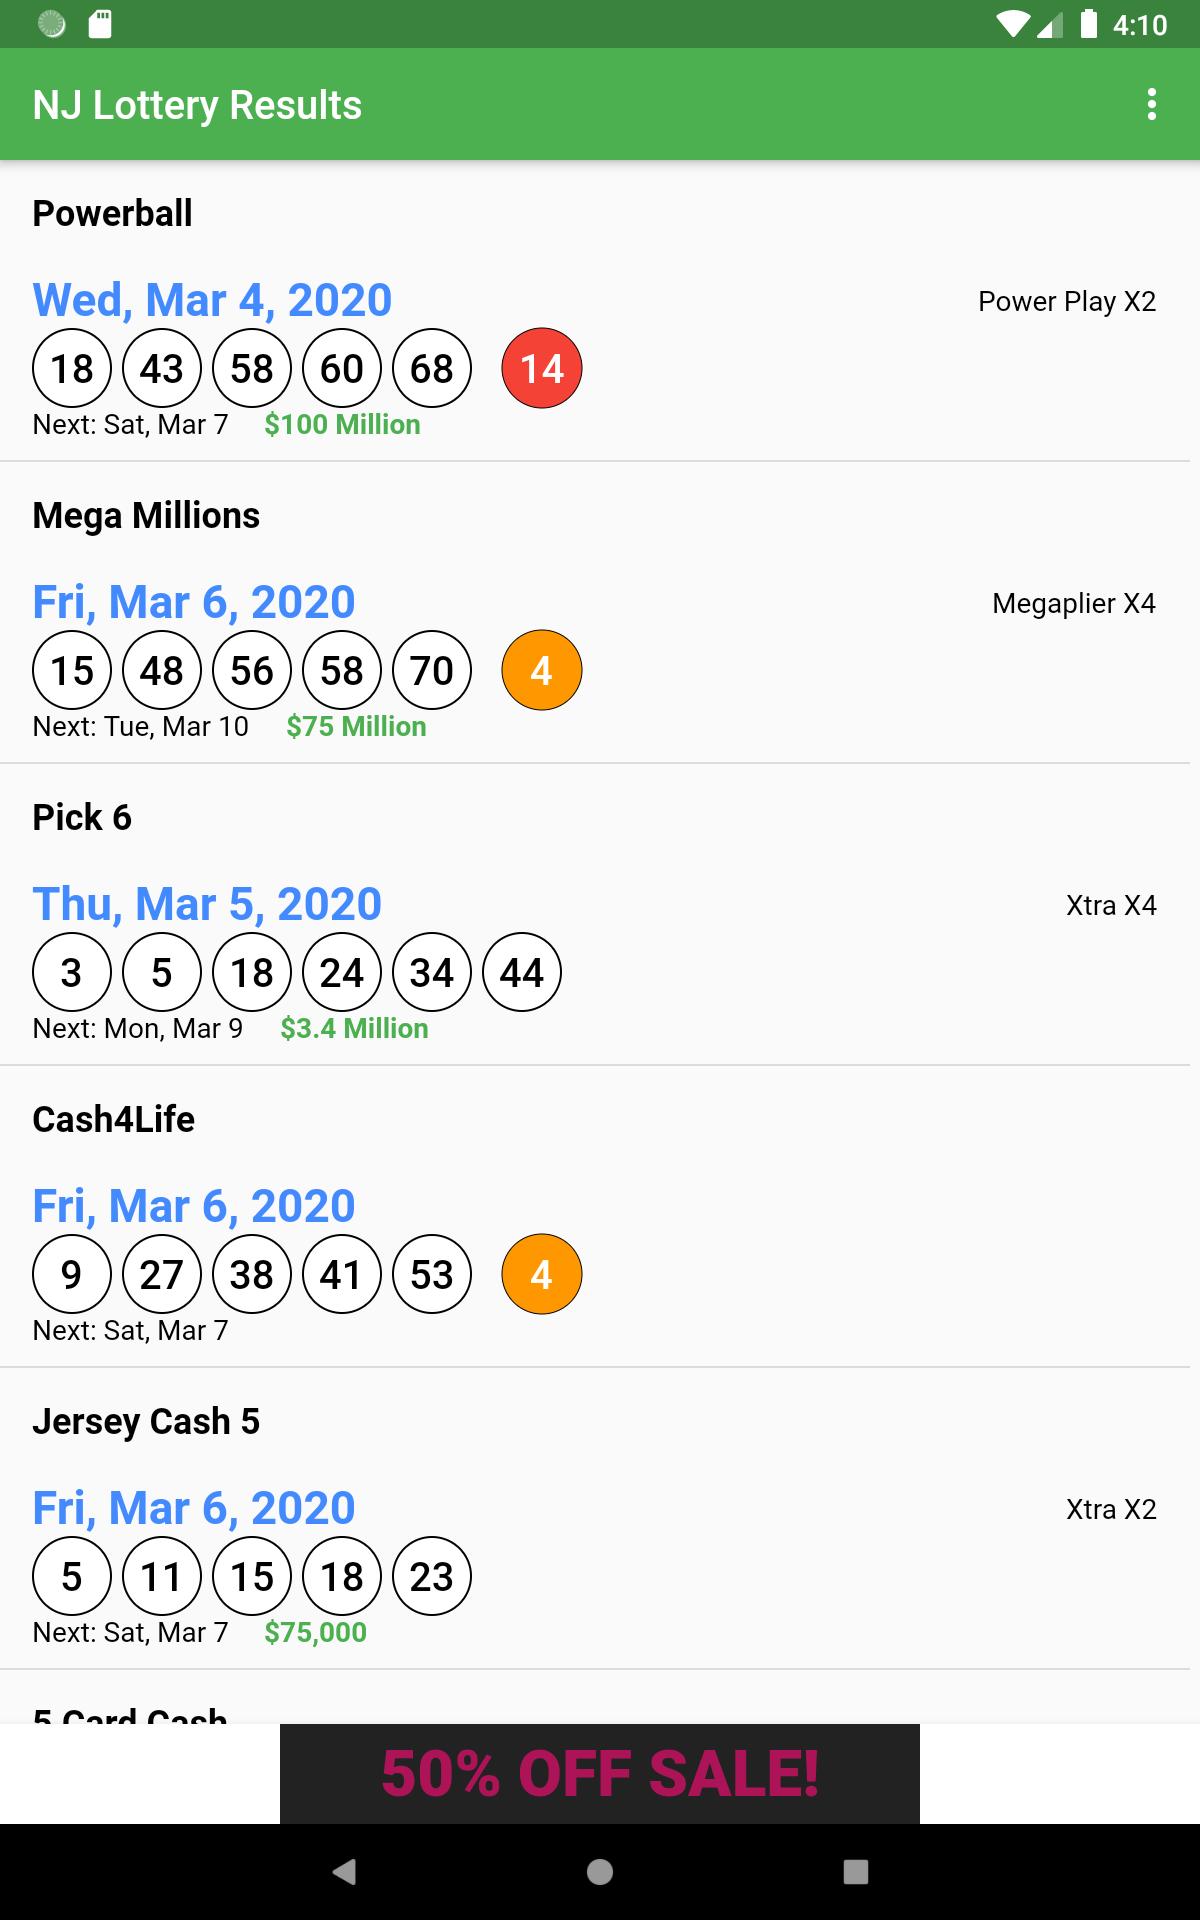 NJ Lottery Results for Android APK Download